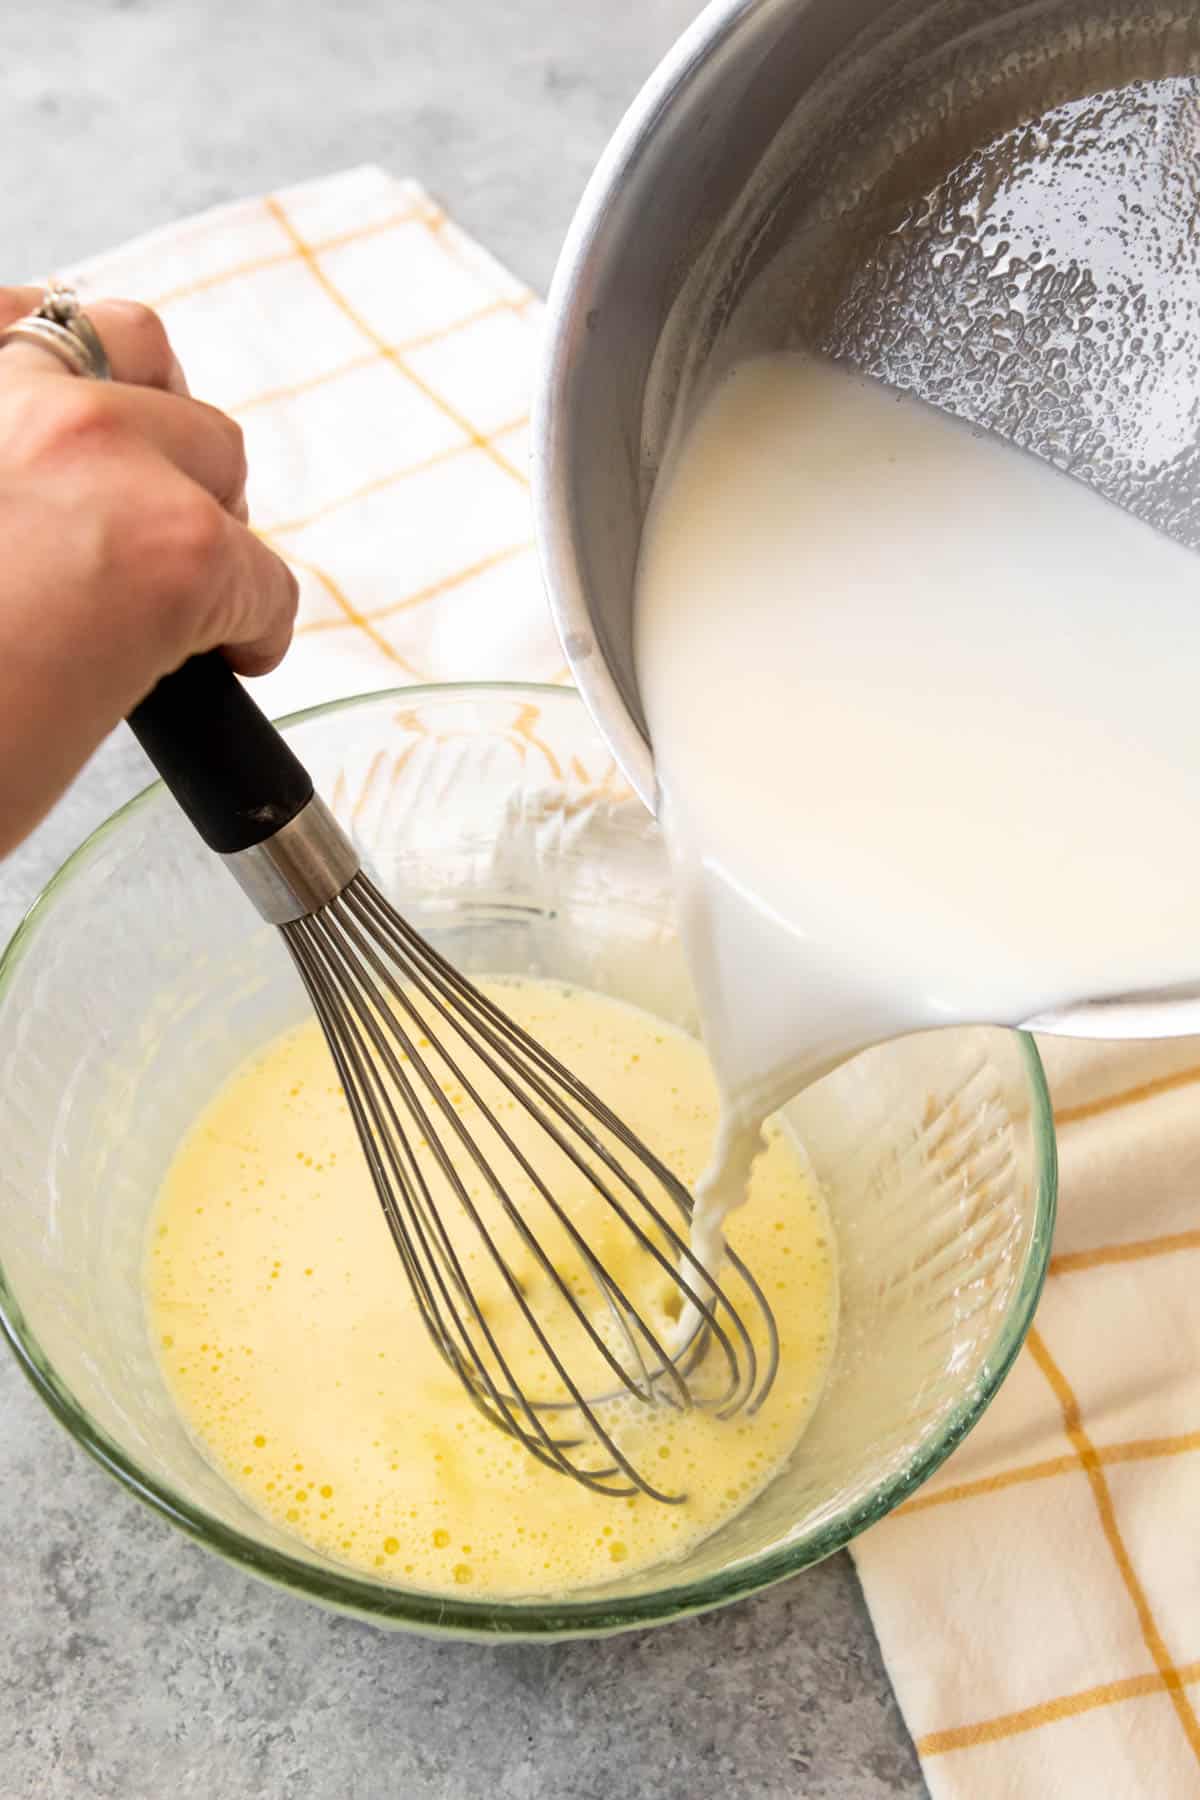 Tempering egg yolks and sugar by pouring hot milk into the whisked egg mixture while whisking so the yolks don't scramble.